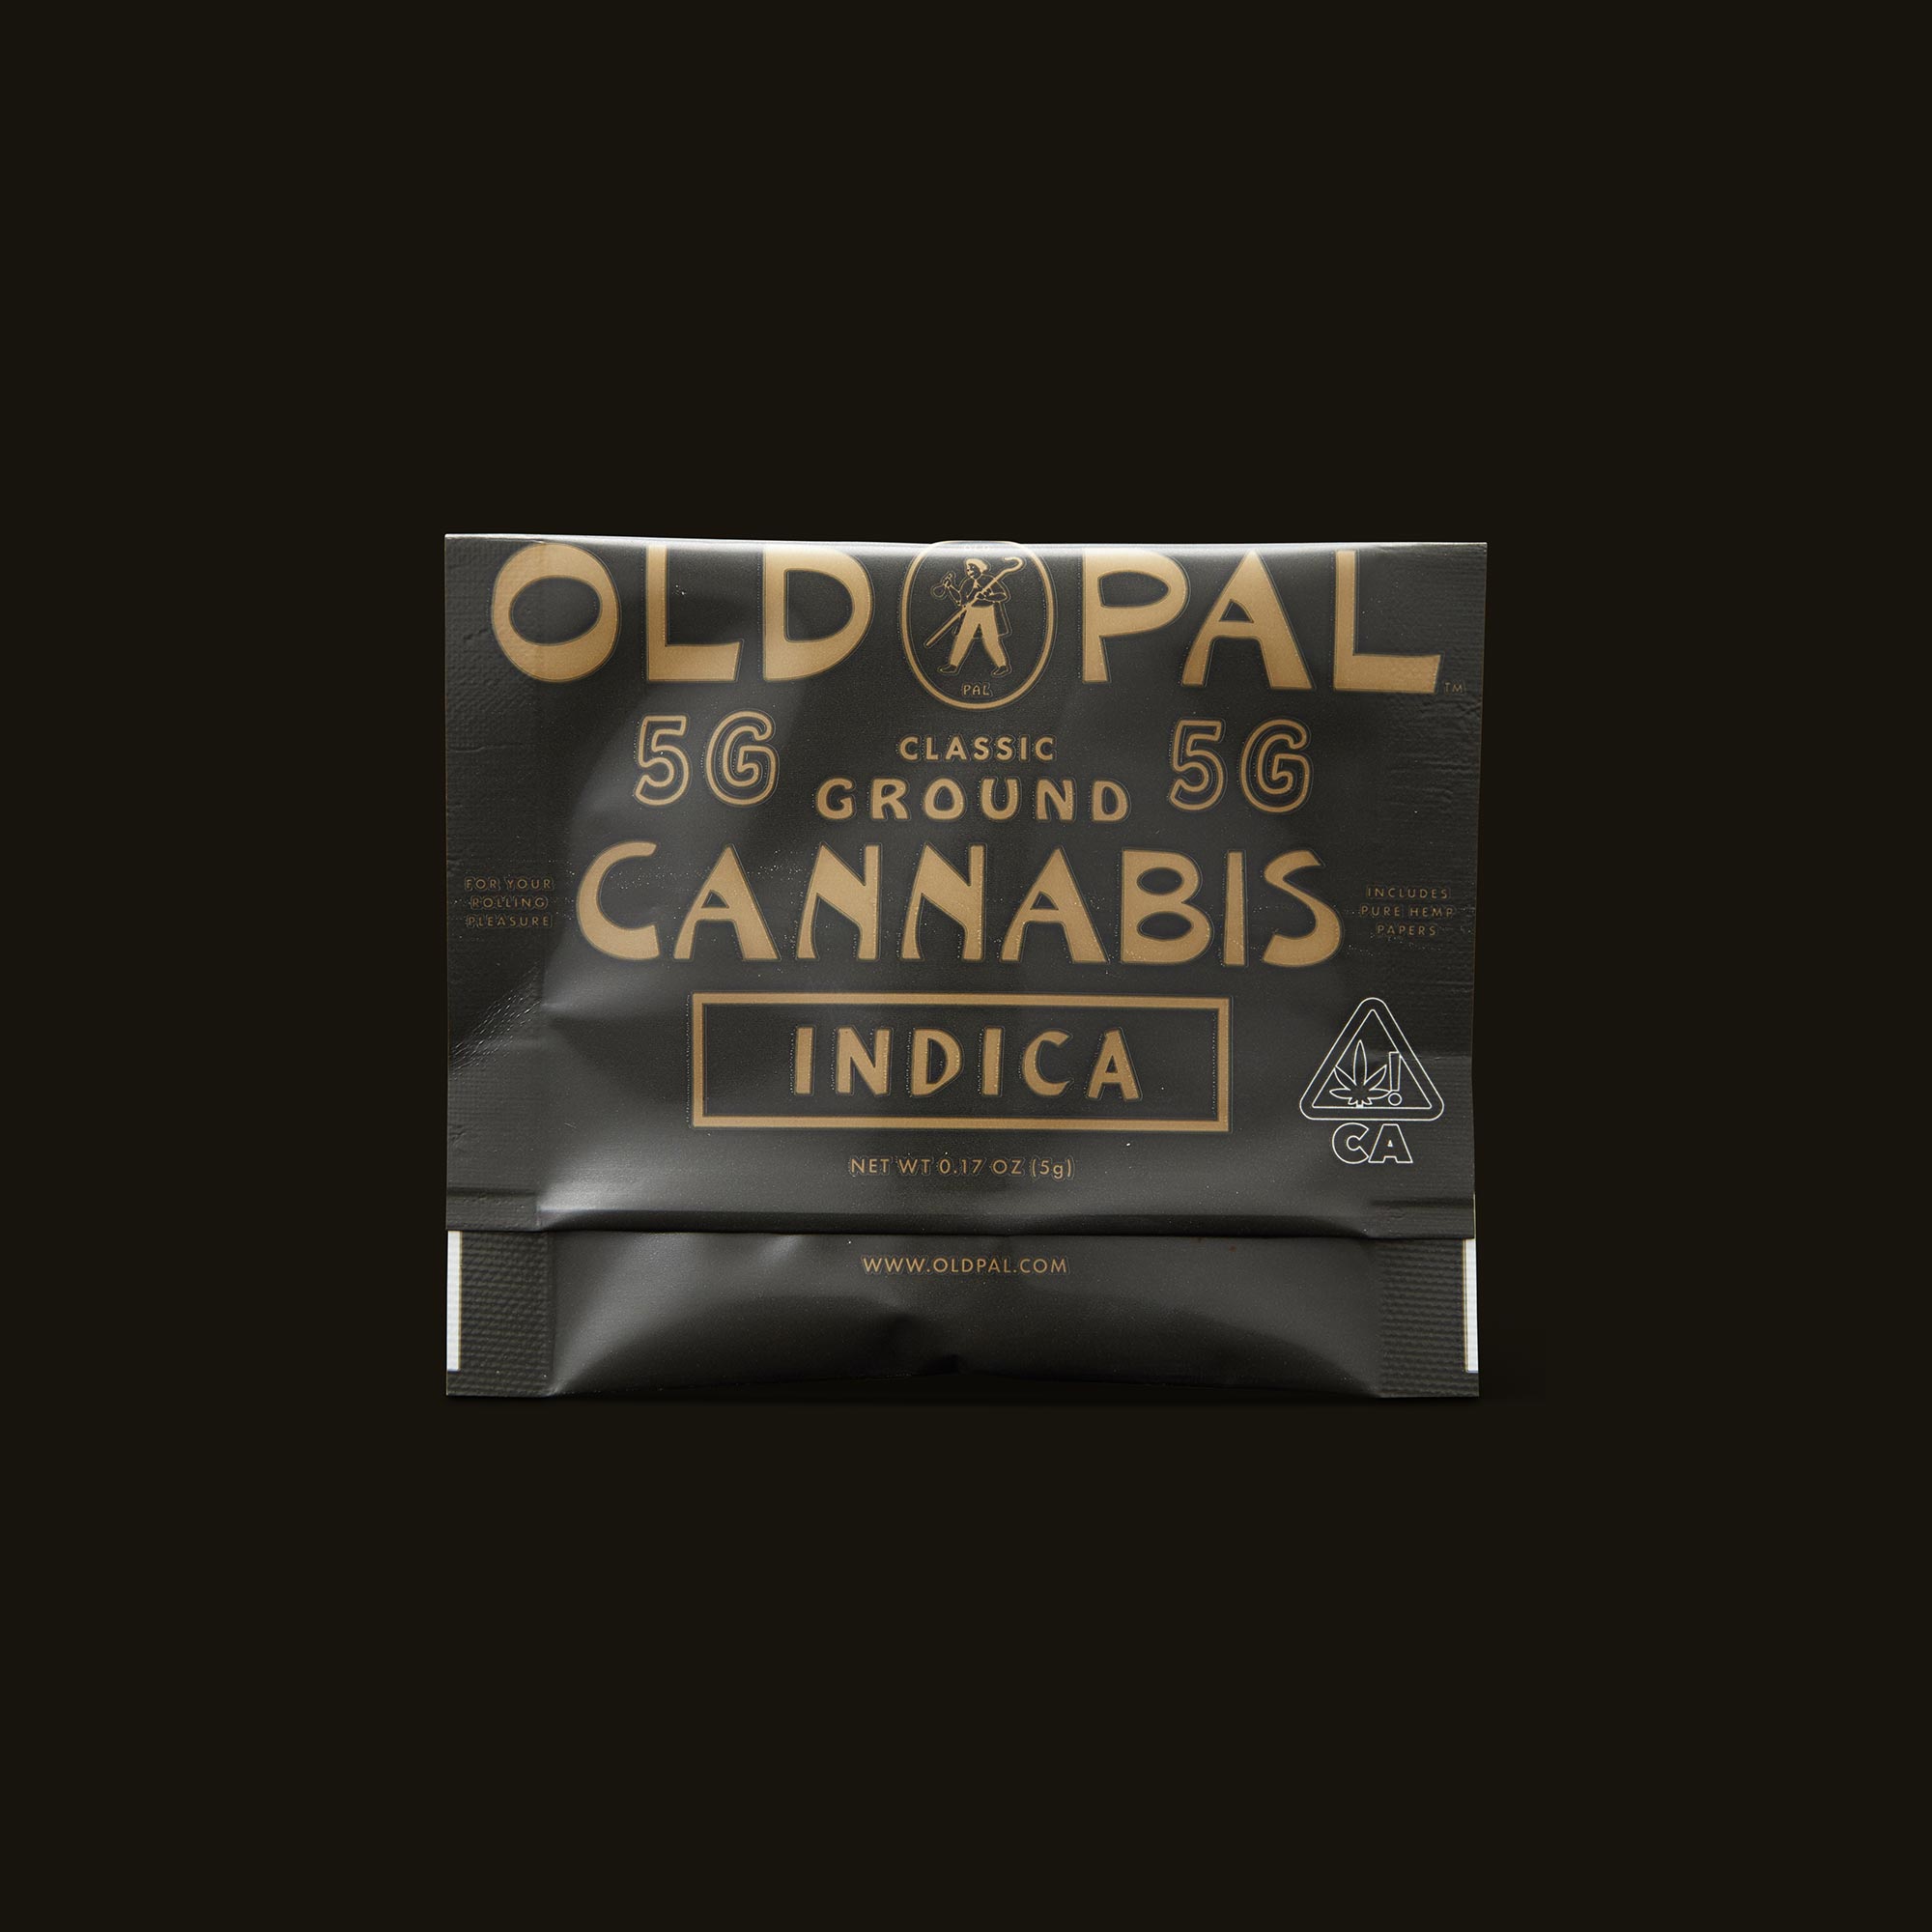 Old-Pal-Ready-to-Roll-Indica-5g4537-957232.jpg